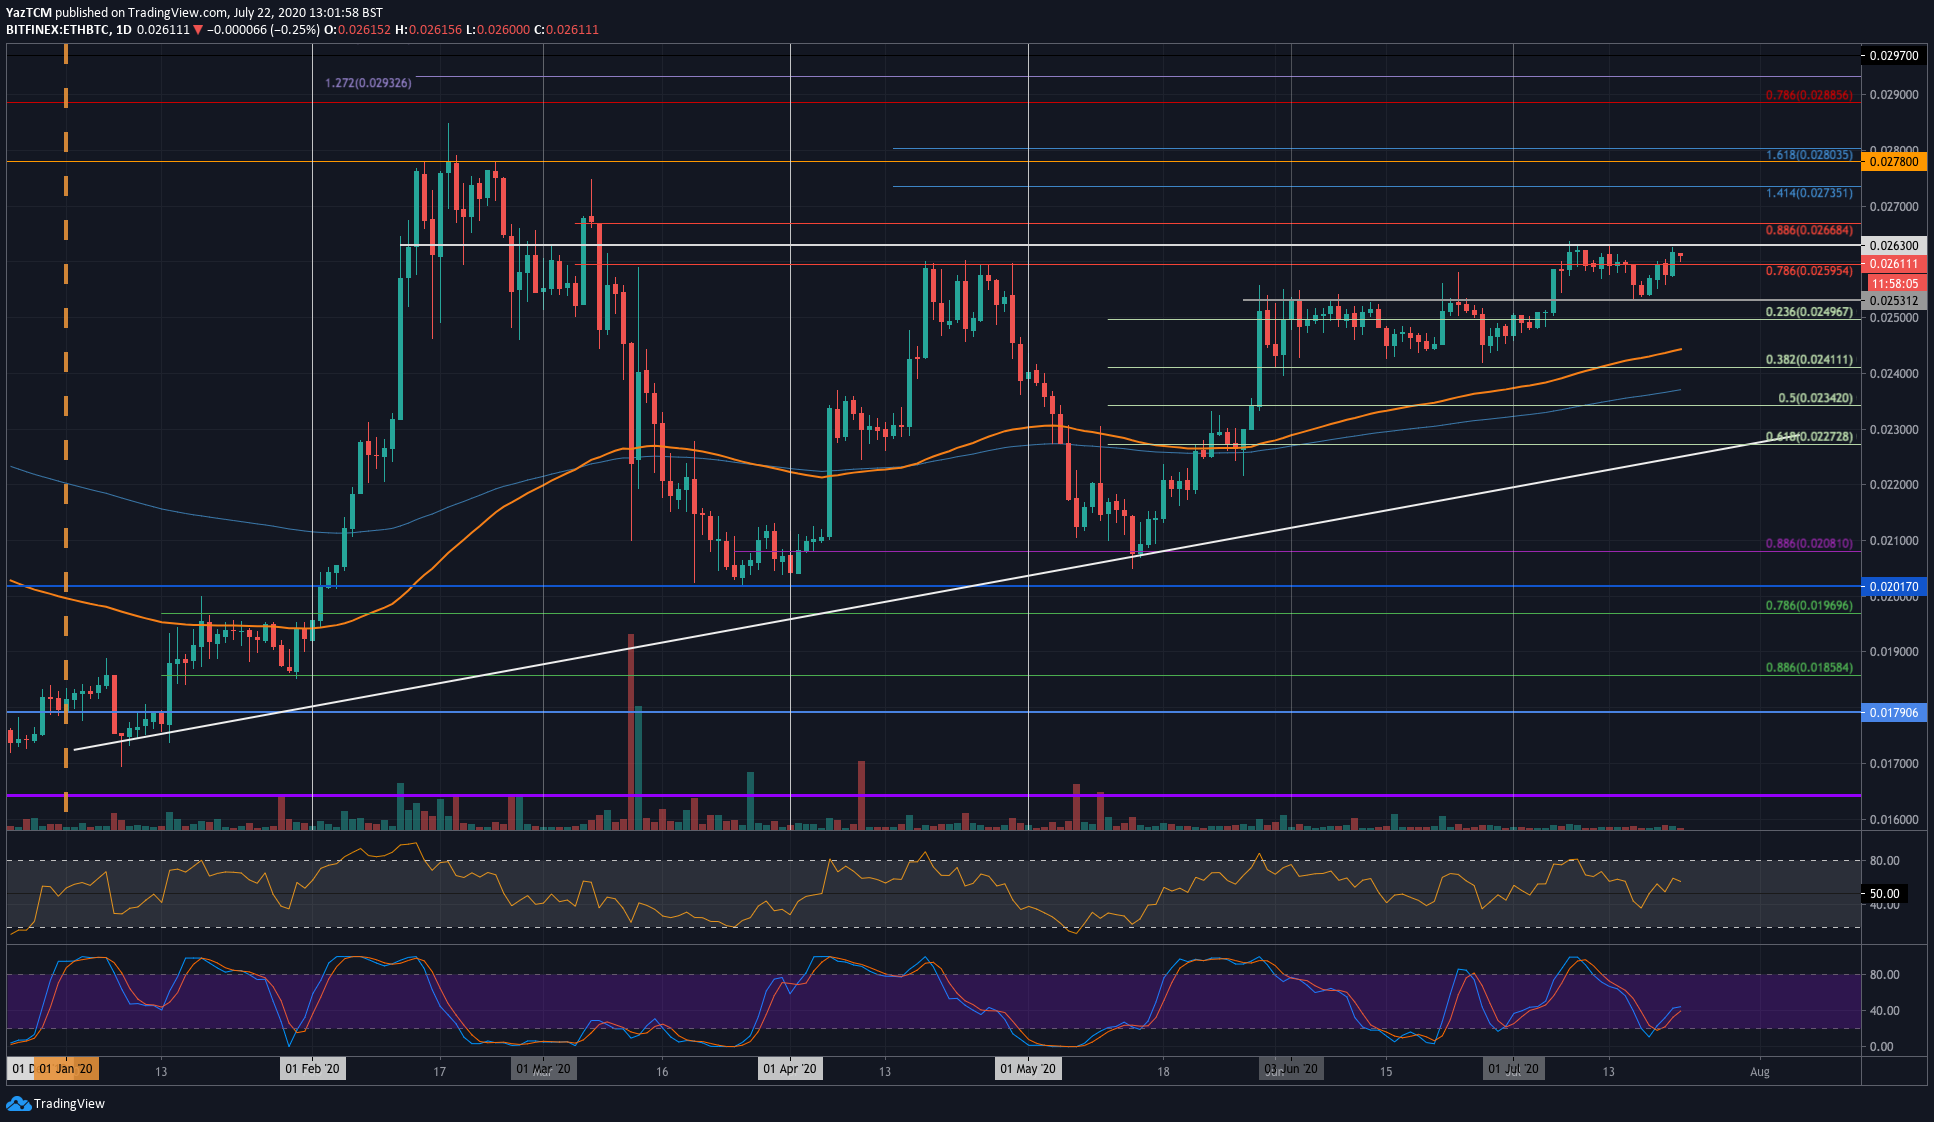 Ethereum Price Analysis: After BTC Woke Up, Can ETH Finally Reclaim $250?